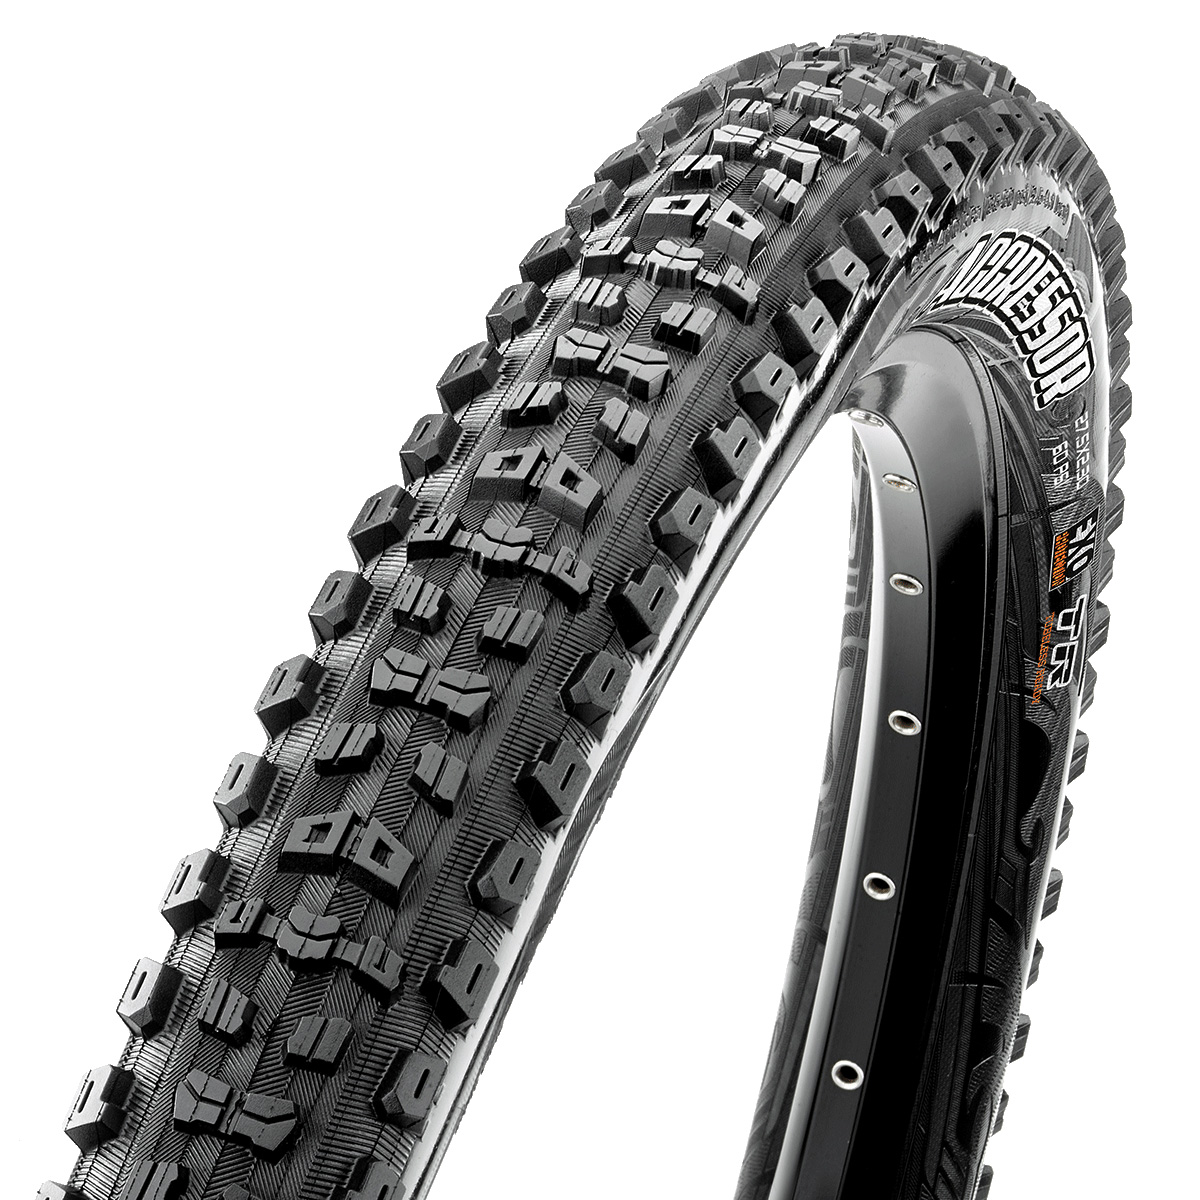 Maxxis Aggressor 27,5x2.50 EXO Protection, Tubeless Ready 